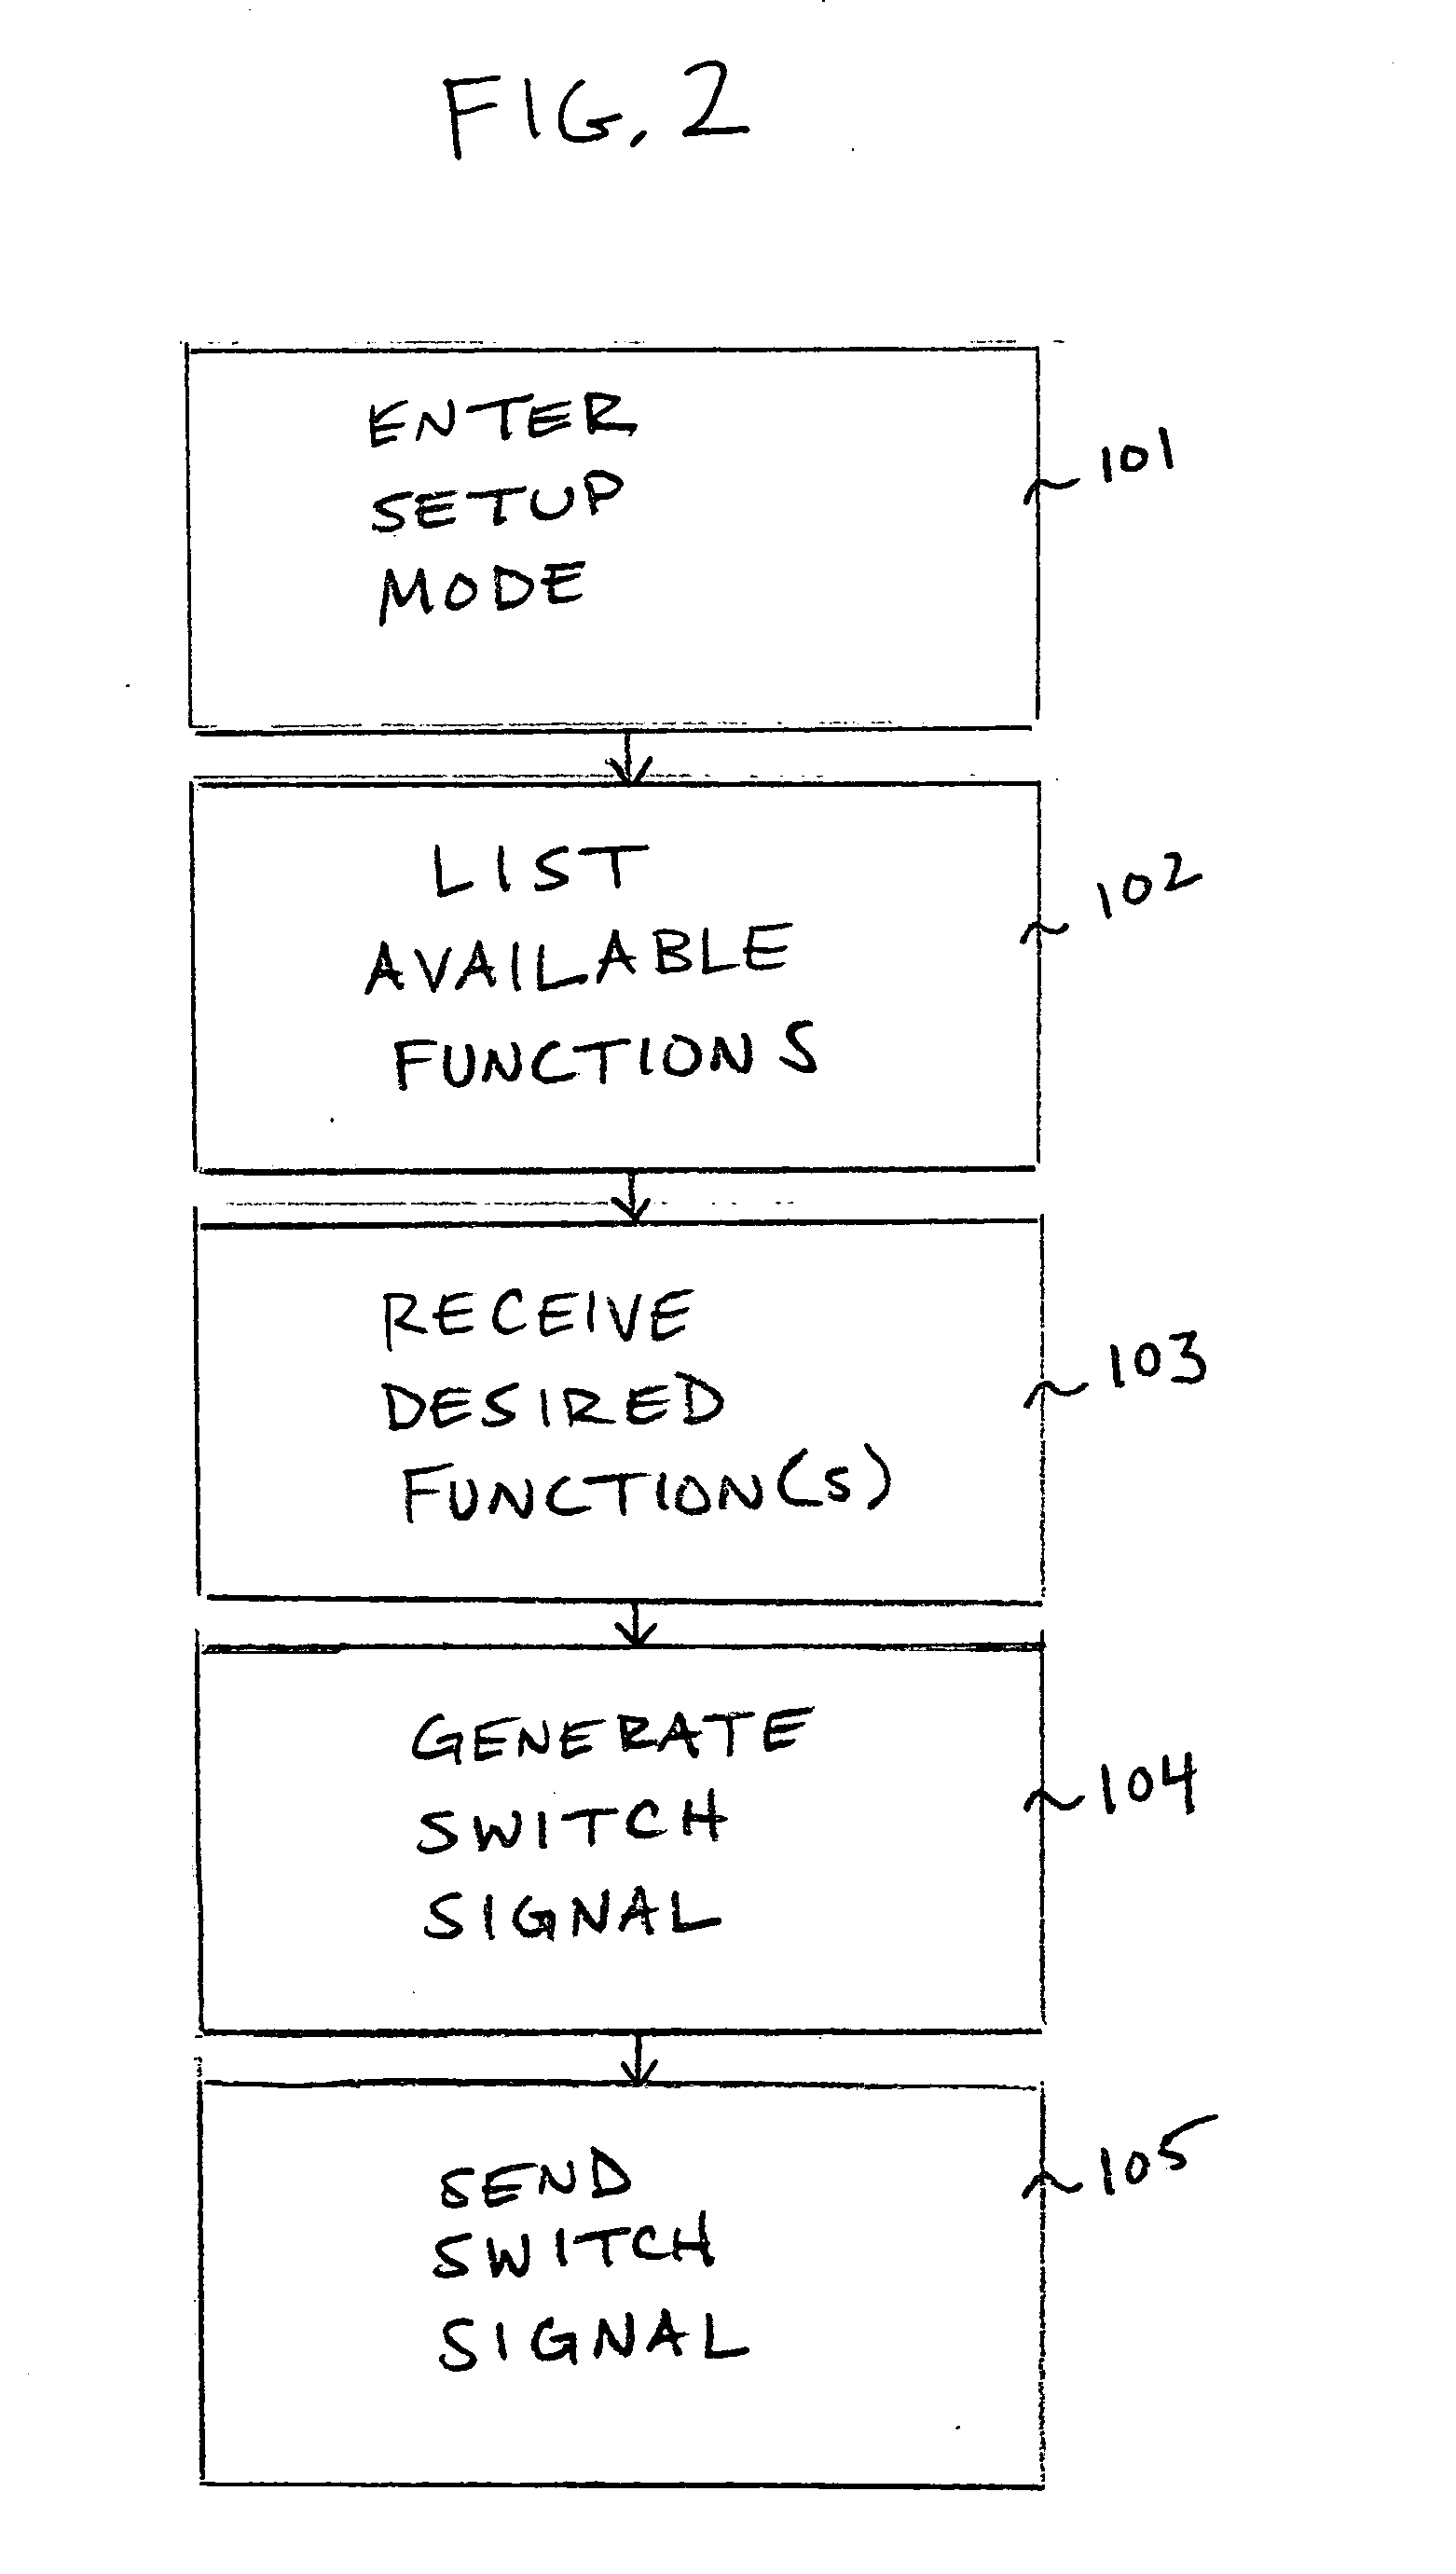 System and method utilizing virtual switching for electrical panel metering